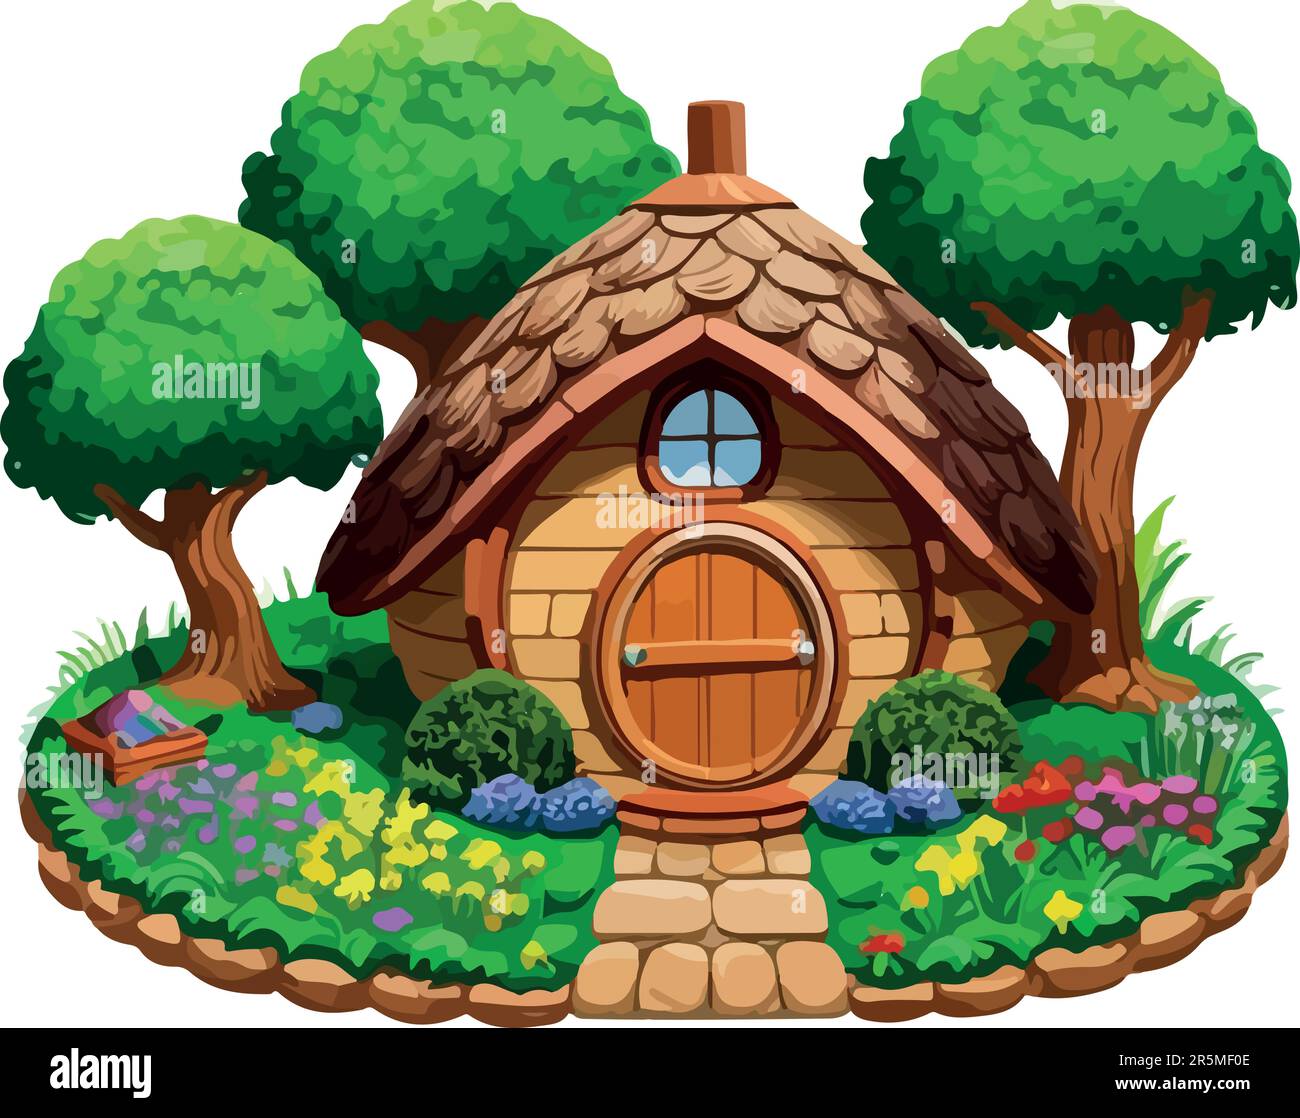 Super and cuteness dwarf and hobbit house Stock Vector